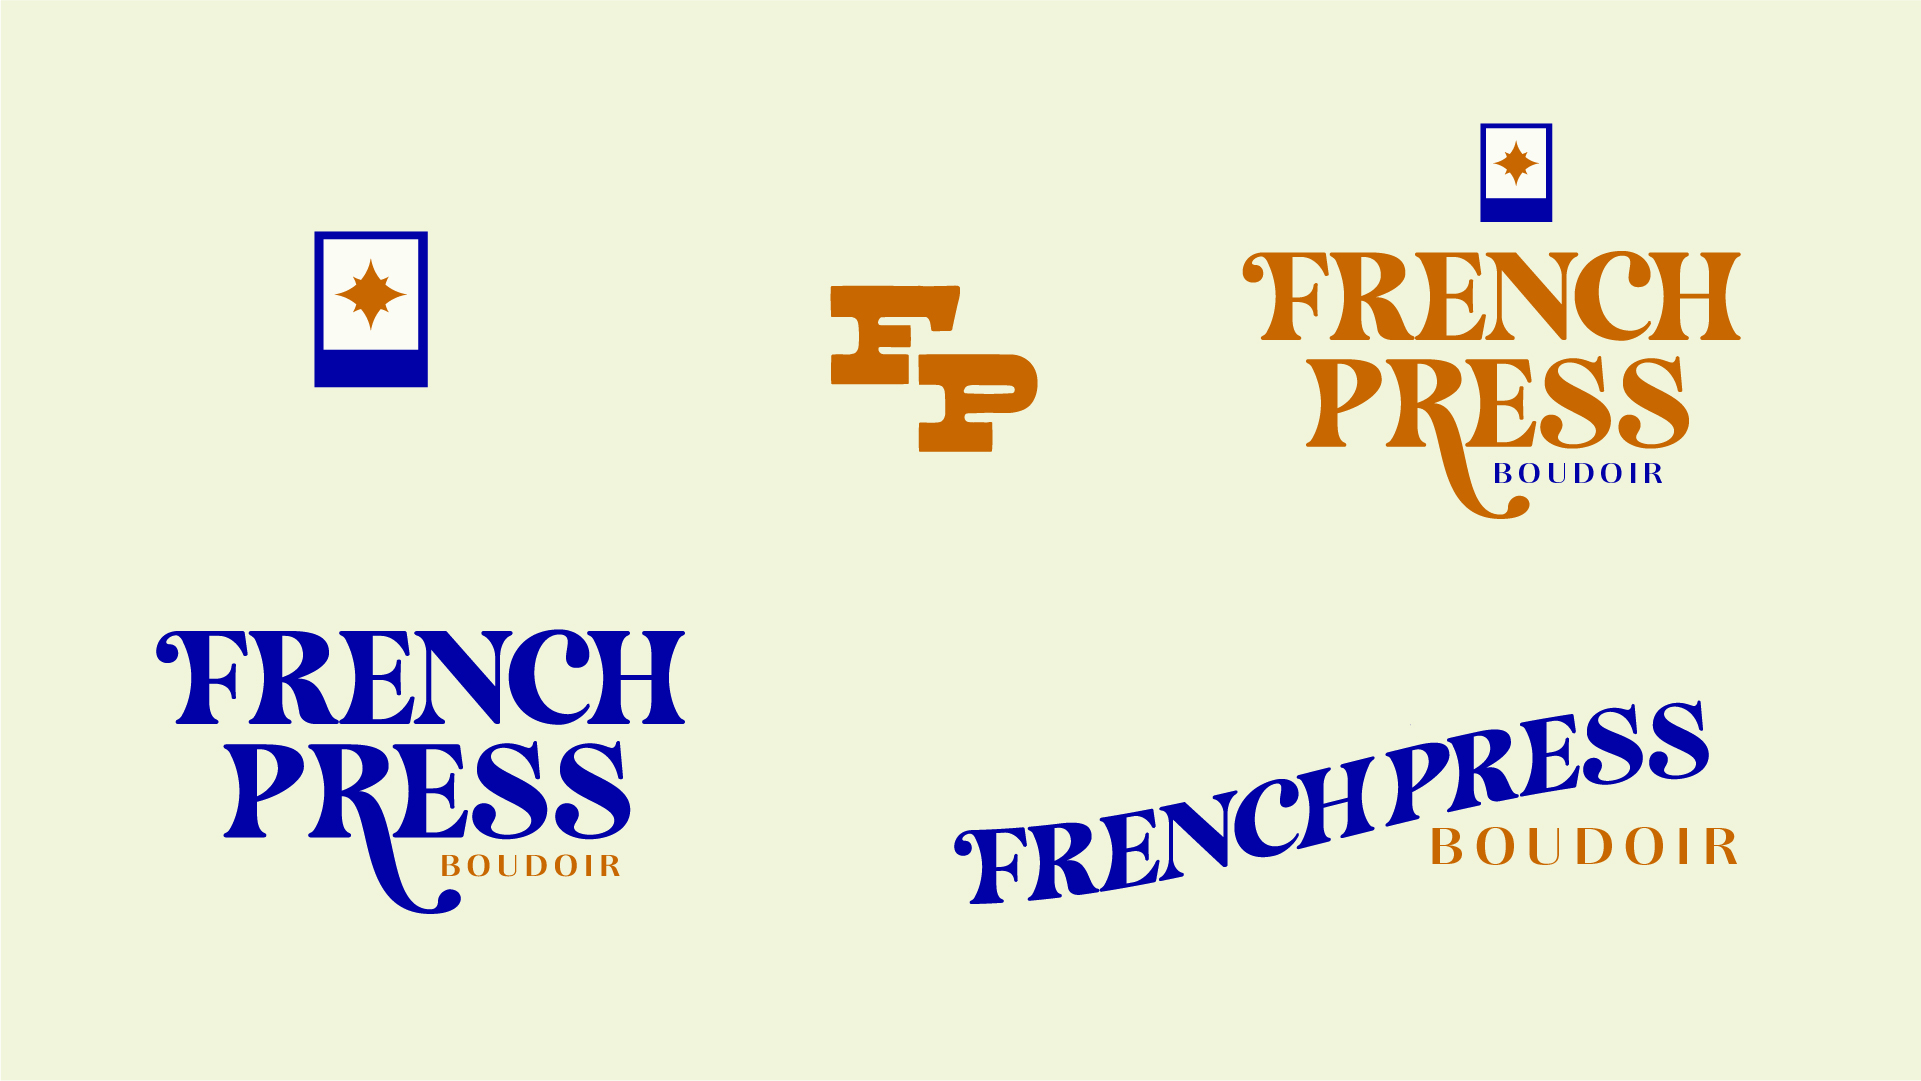 featured image three:French Press Boudoir Branding